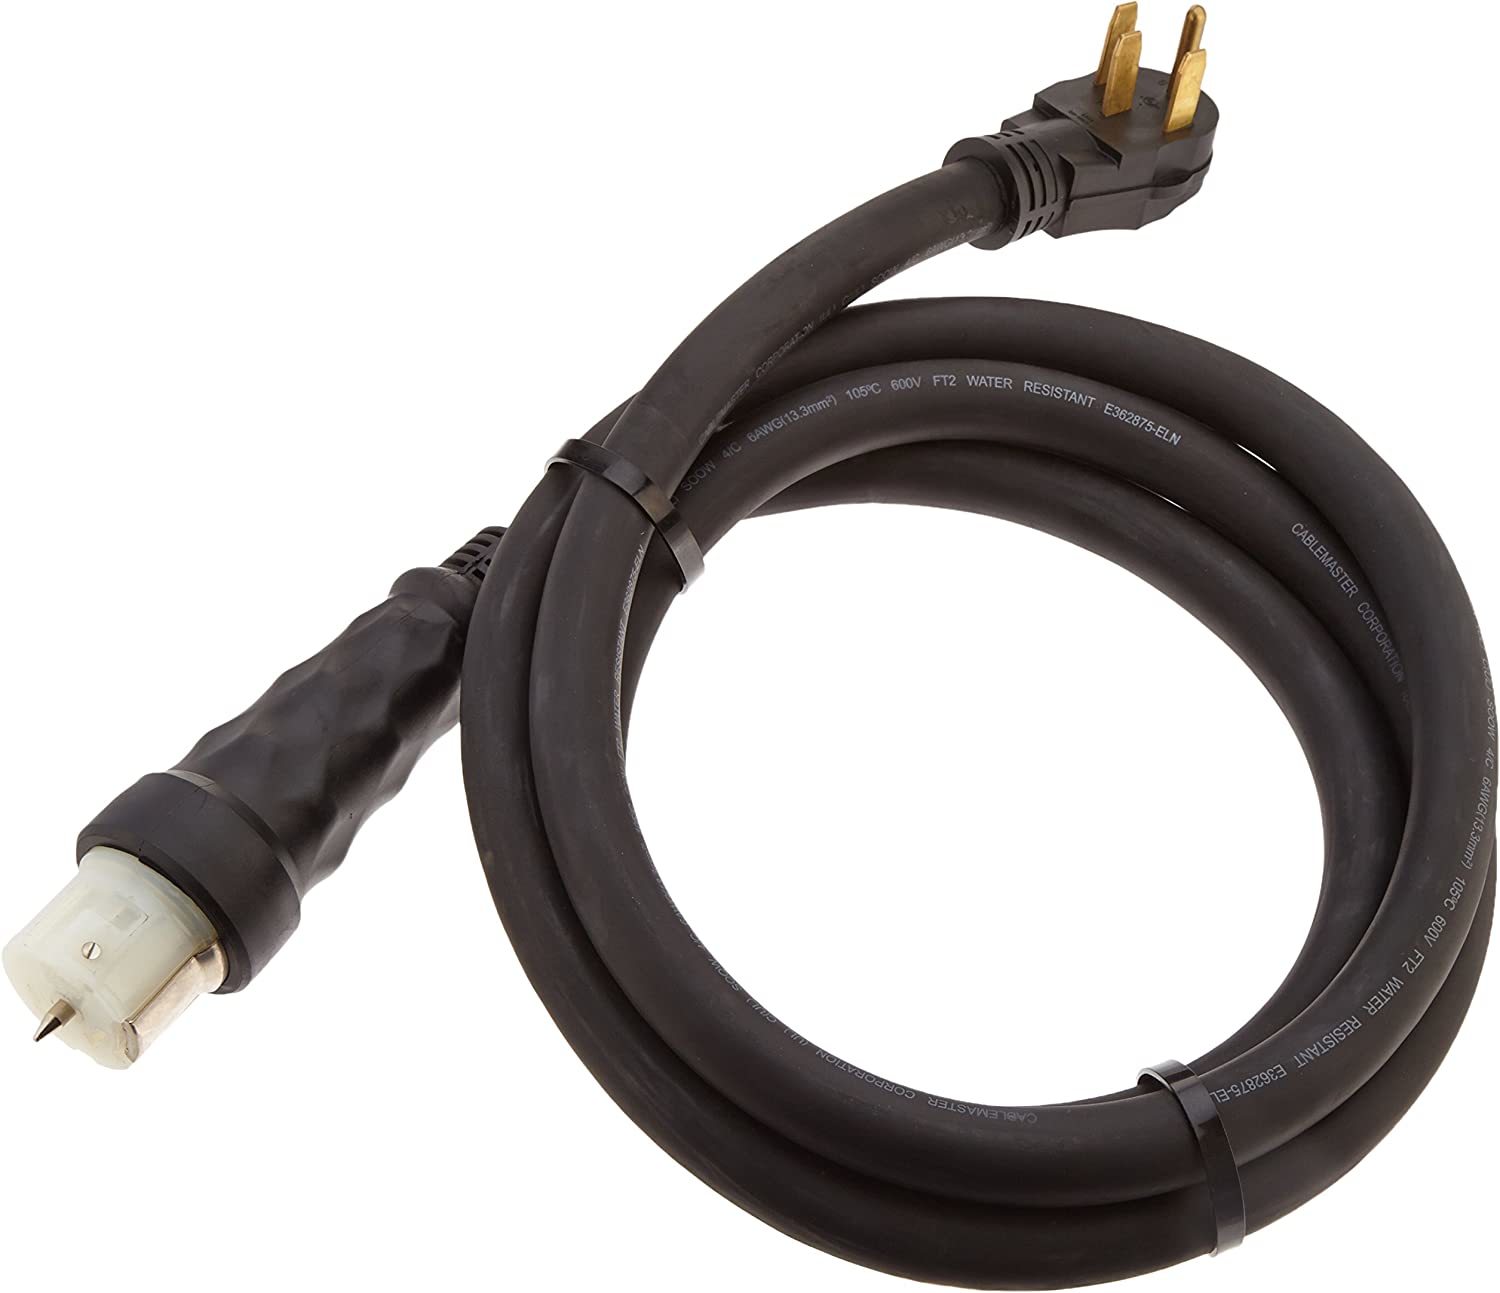 Primary image for Black Generac 6330 10-Foot 50-Amp Generator Cord With Cs6364 Female Locking End